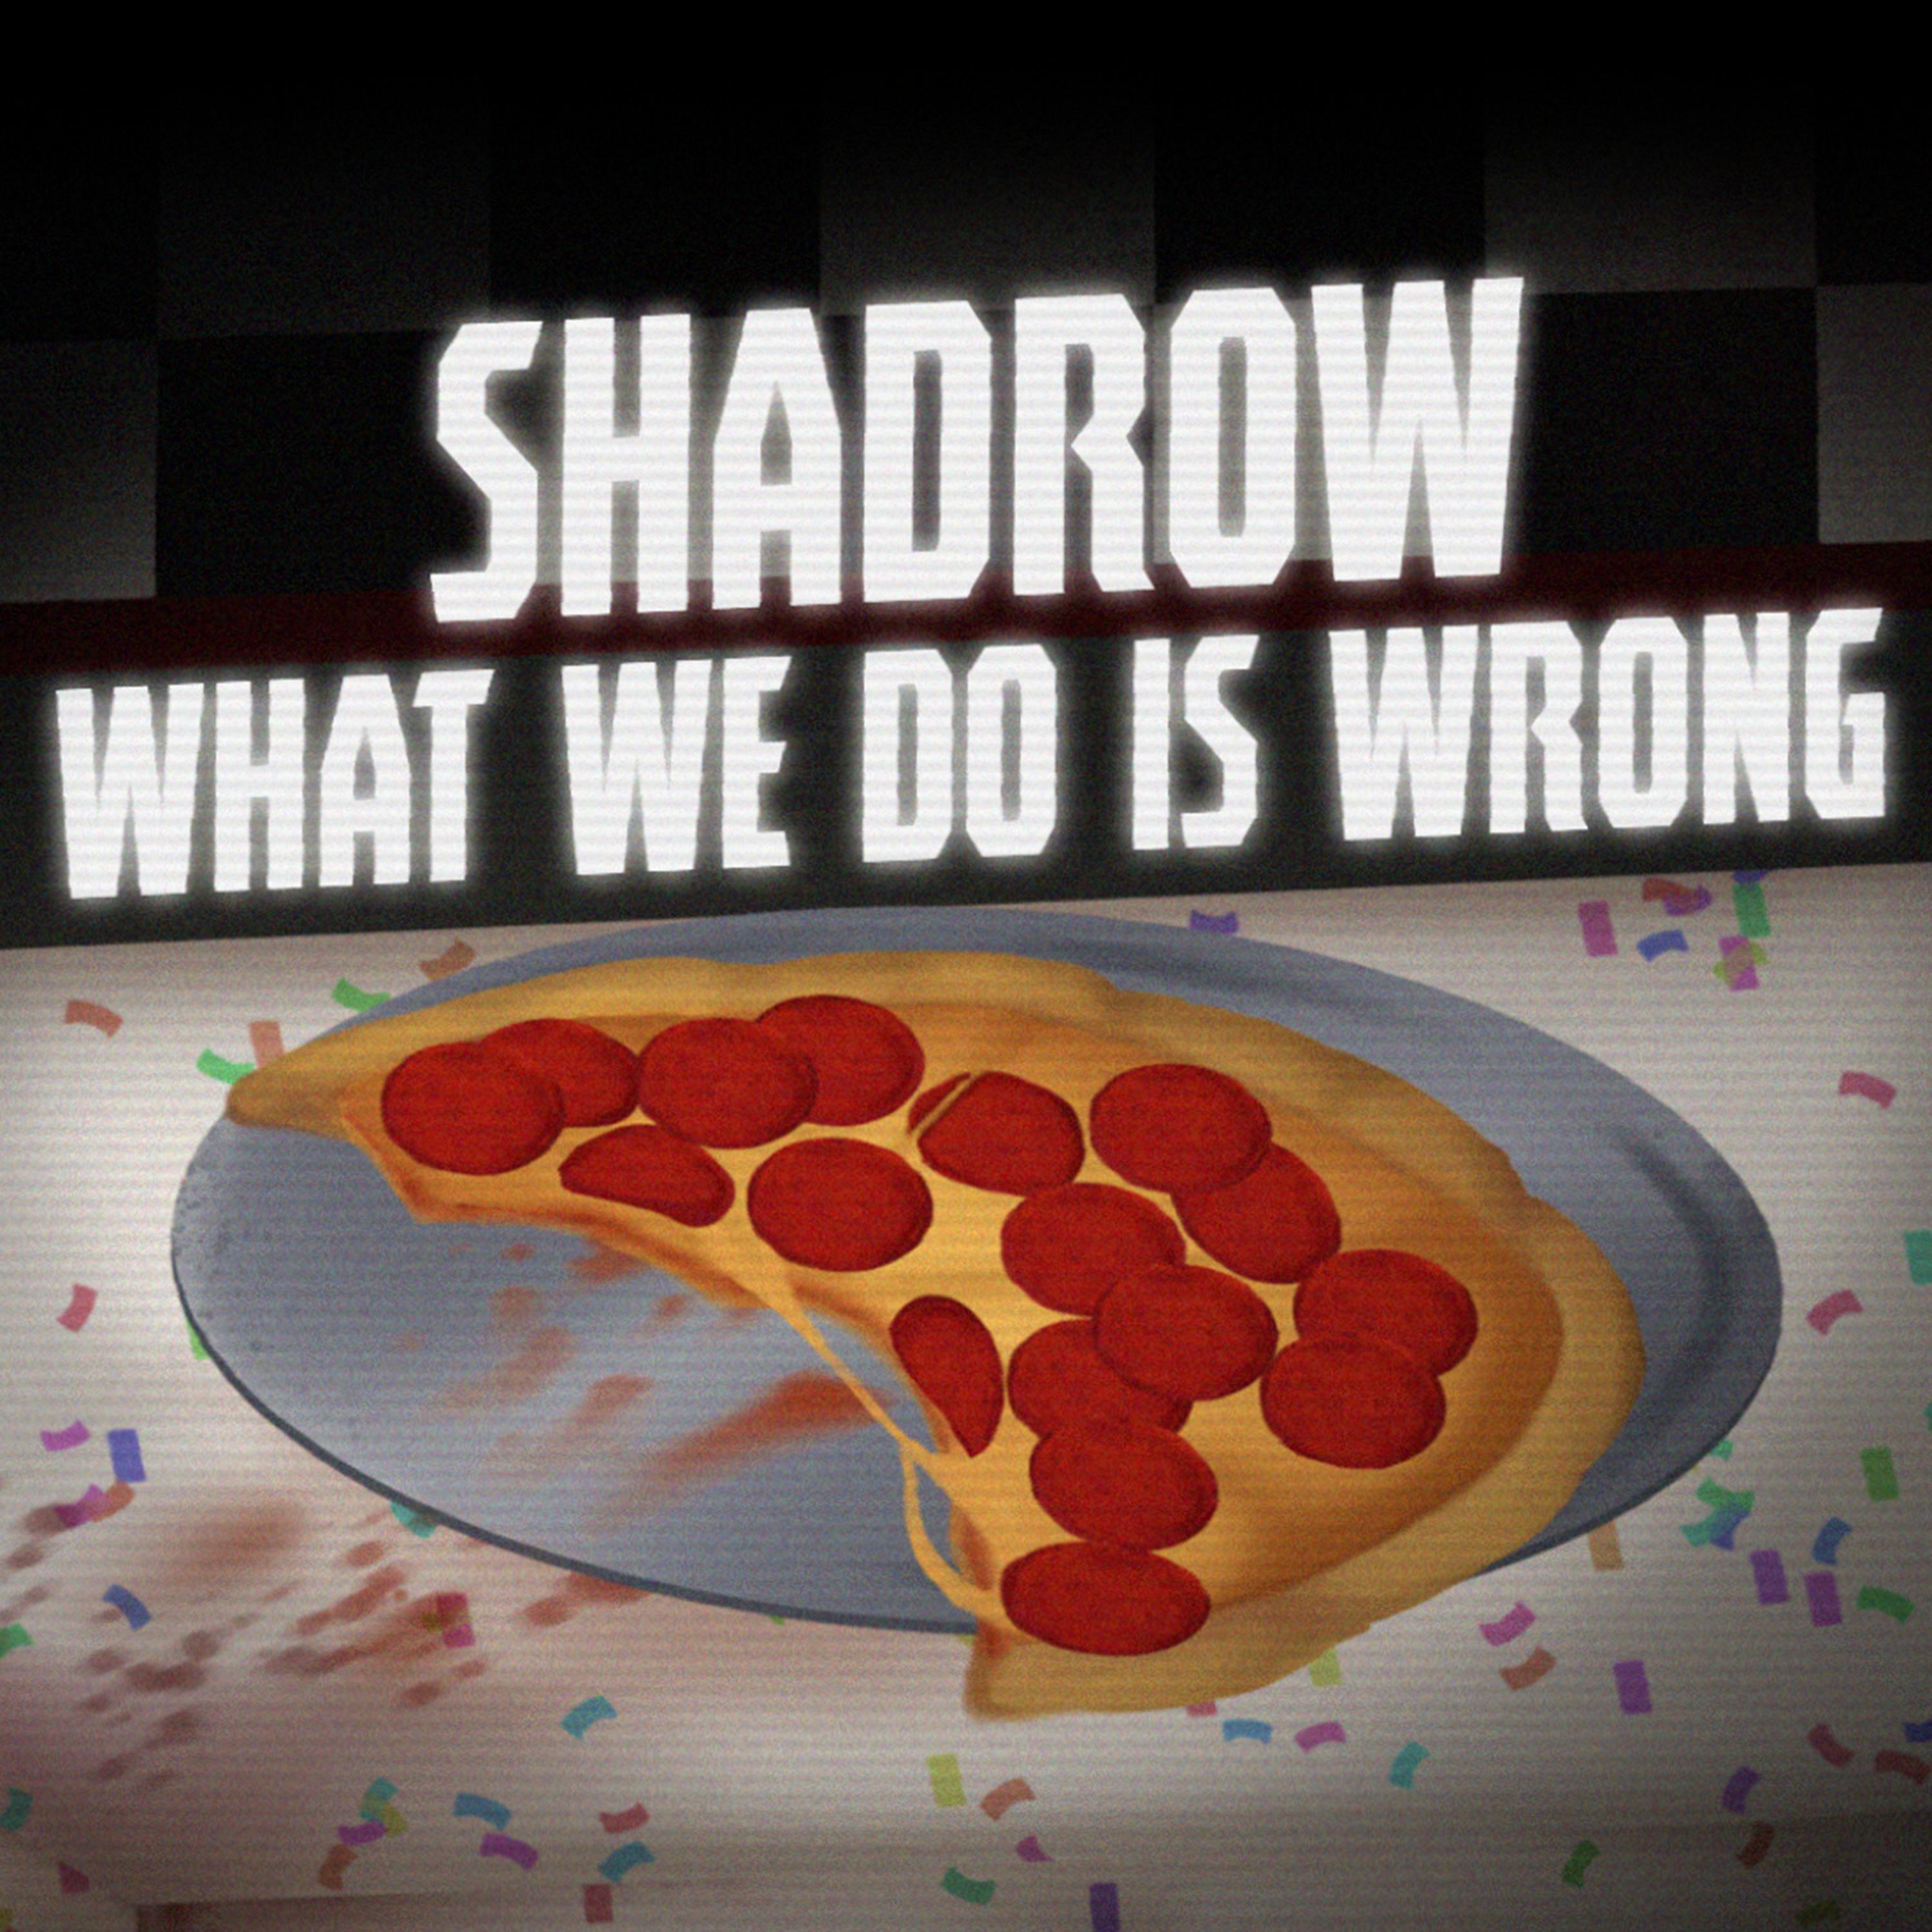 Shadrow - What We Do is Wrong